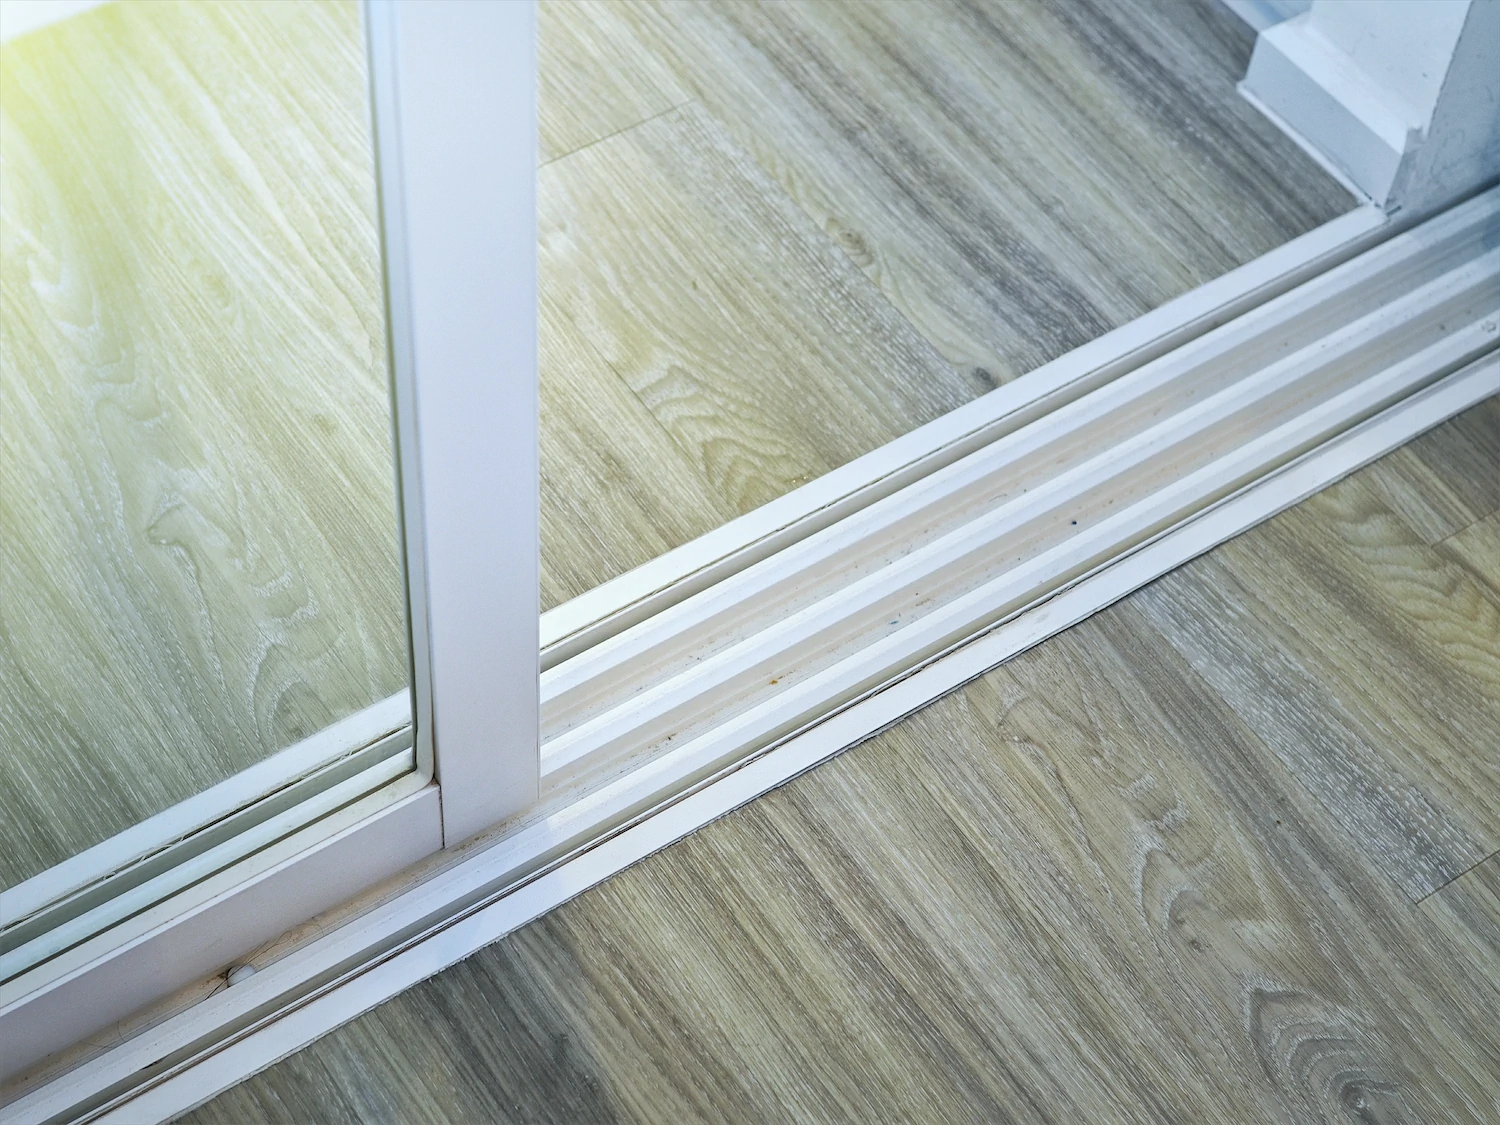 How to Remove Moisture from a Sliding Glass Door